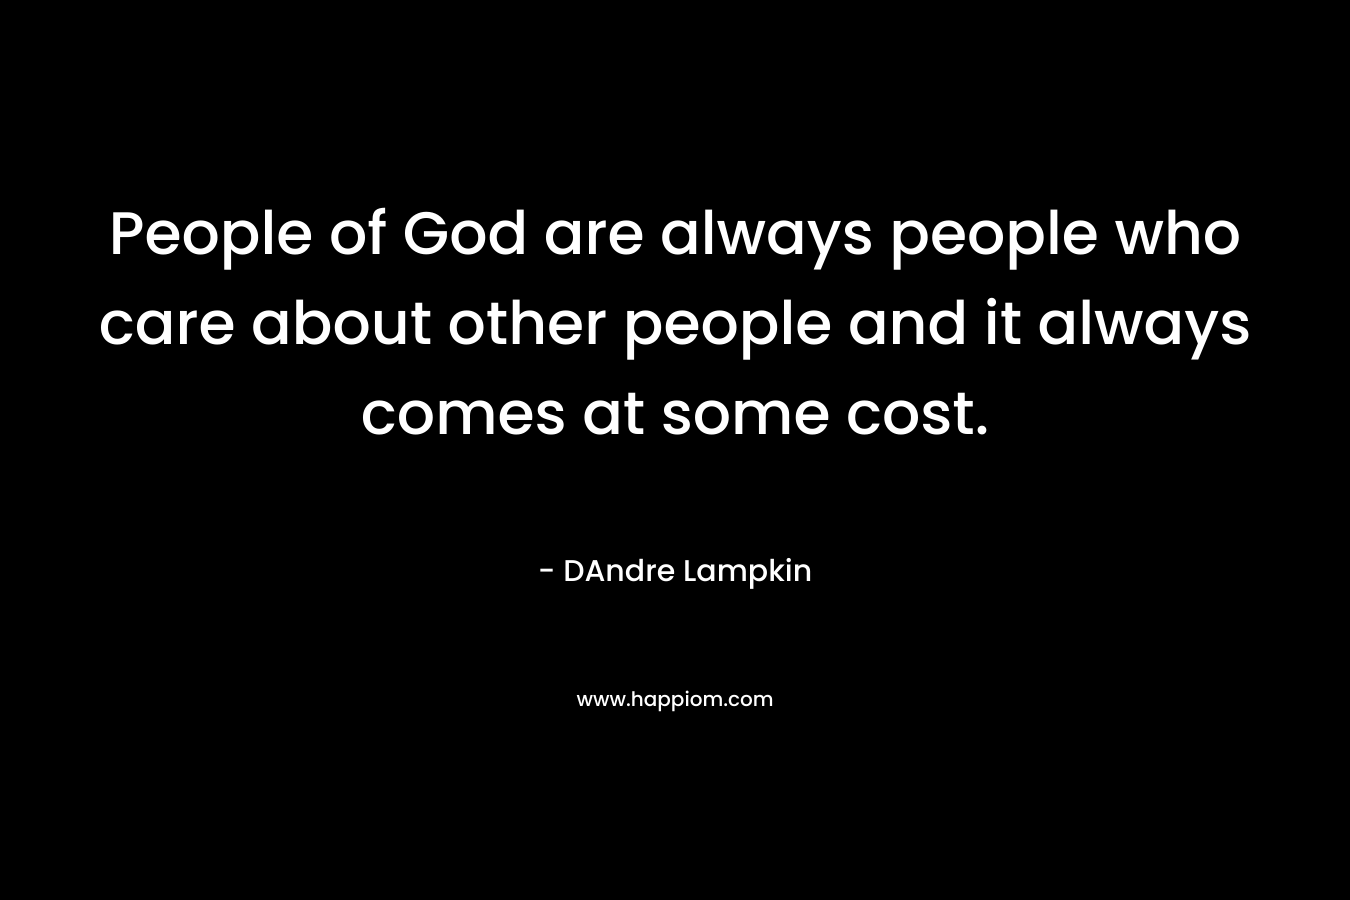 People of God are always people who care about other people and it always comes at some cost.